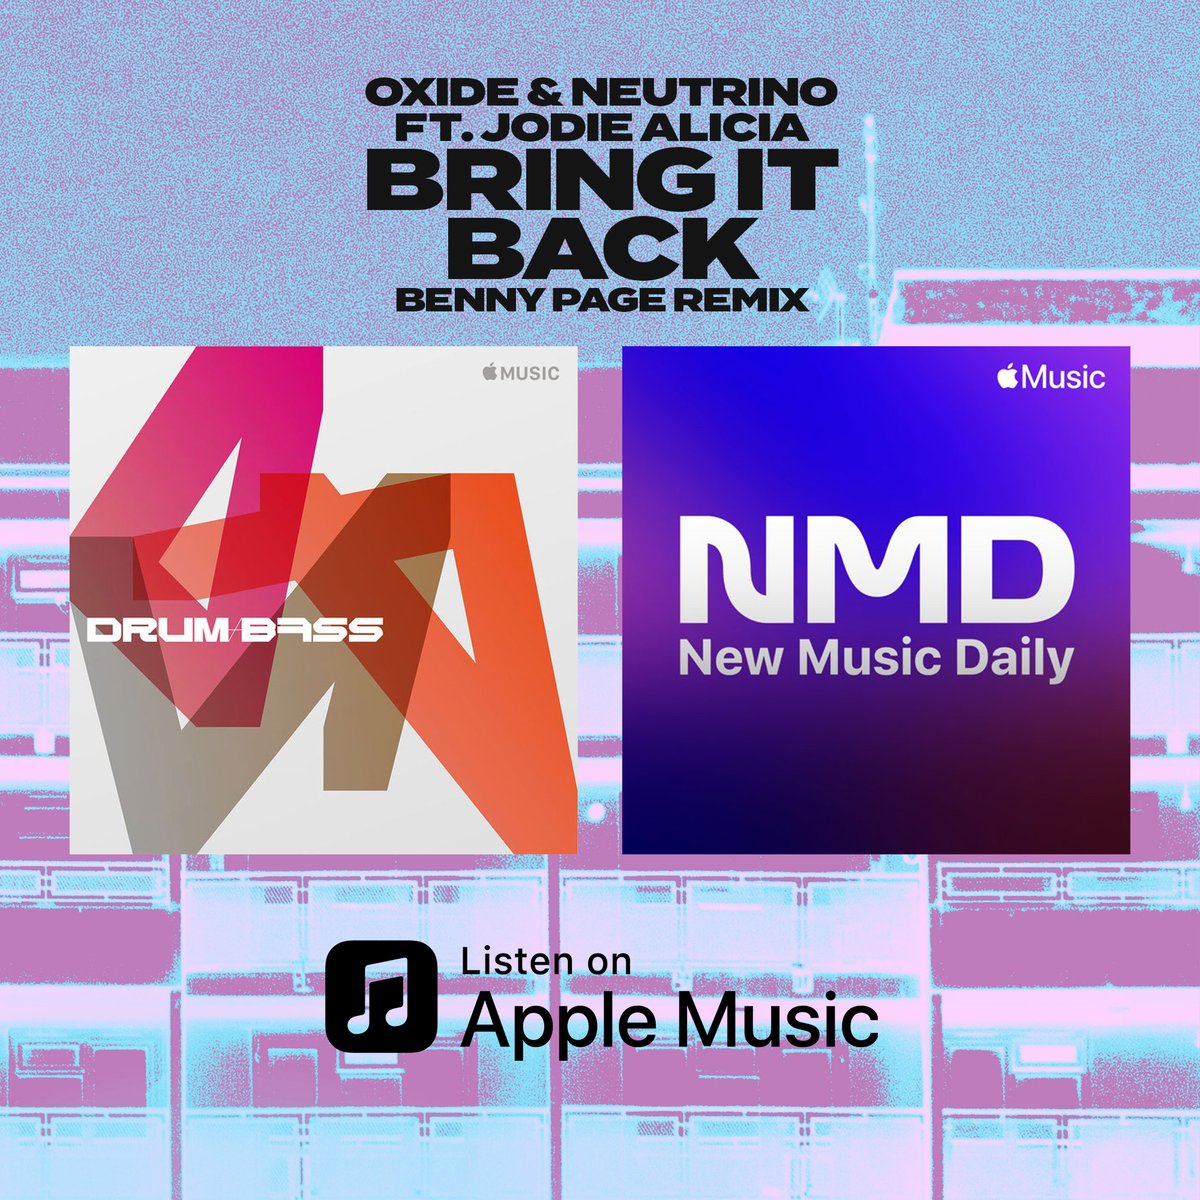 Thanks @AppleMusic for adding the @DJOxide and @bennypagemusic remixes of our new single #BringItBack ft. Jodie Alicia to the New In Dance, Drum & Bass + New Music Daily Turkey playlists 🔥 music.apple.com/gb/playlist/pl… music.apple.com/tr/playlist/pl… music.apple.com/gb/playlist/pl… @NewStateMusic